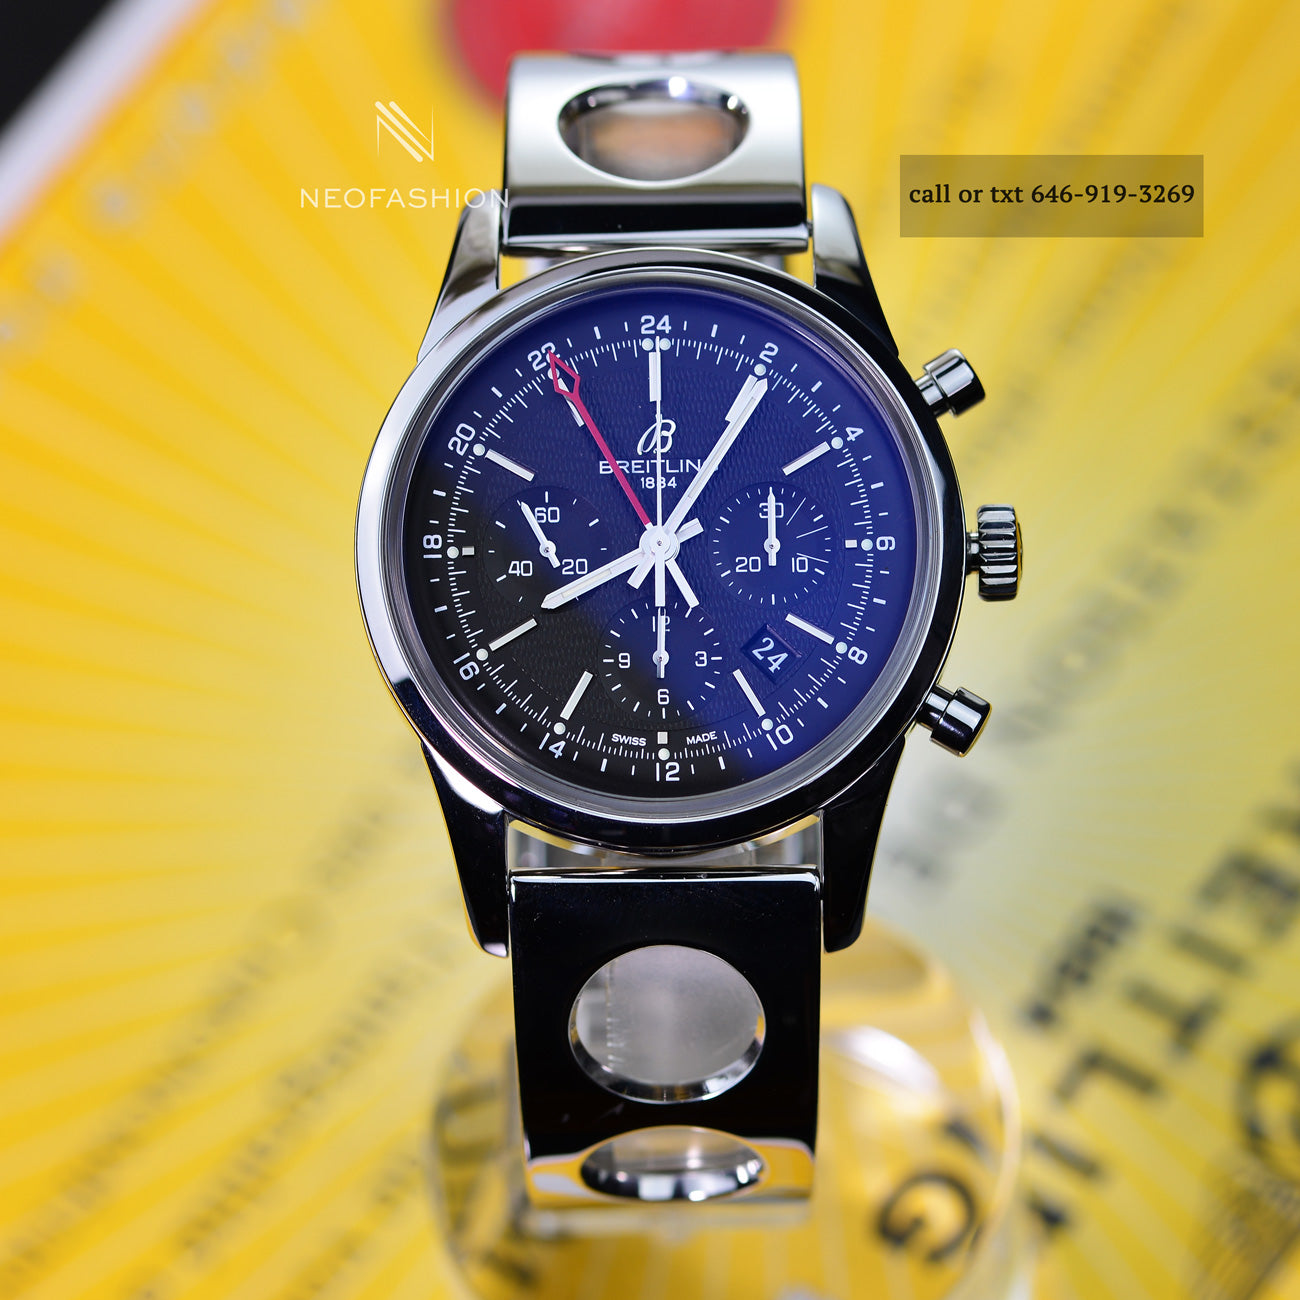 Breitling Transocean Chronograph Limited Edition | AB0151 | Crown & Caliber - Certified Authentic